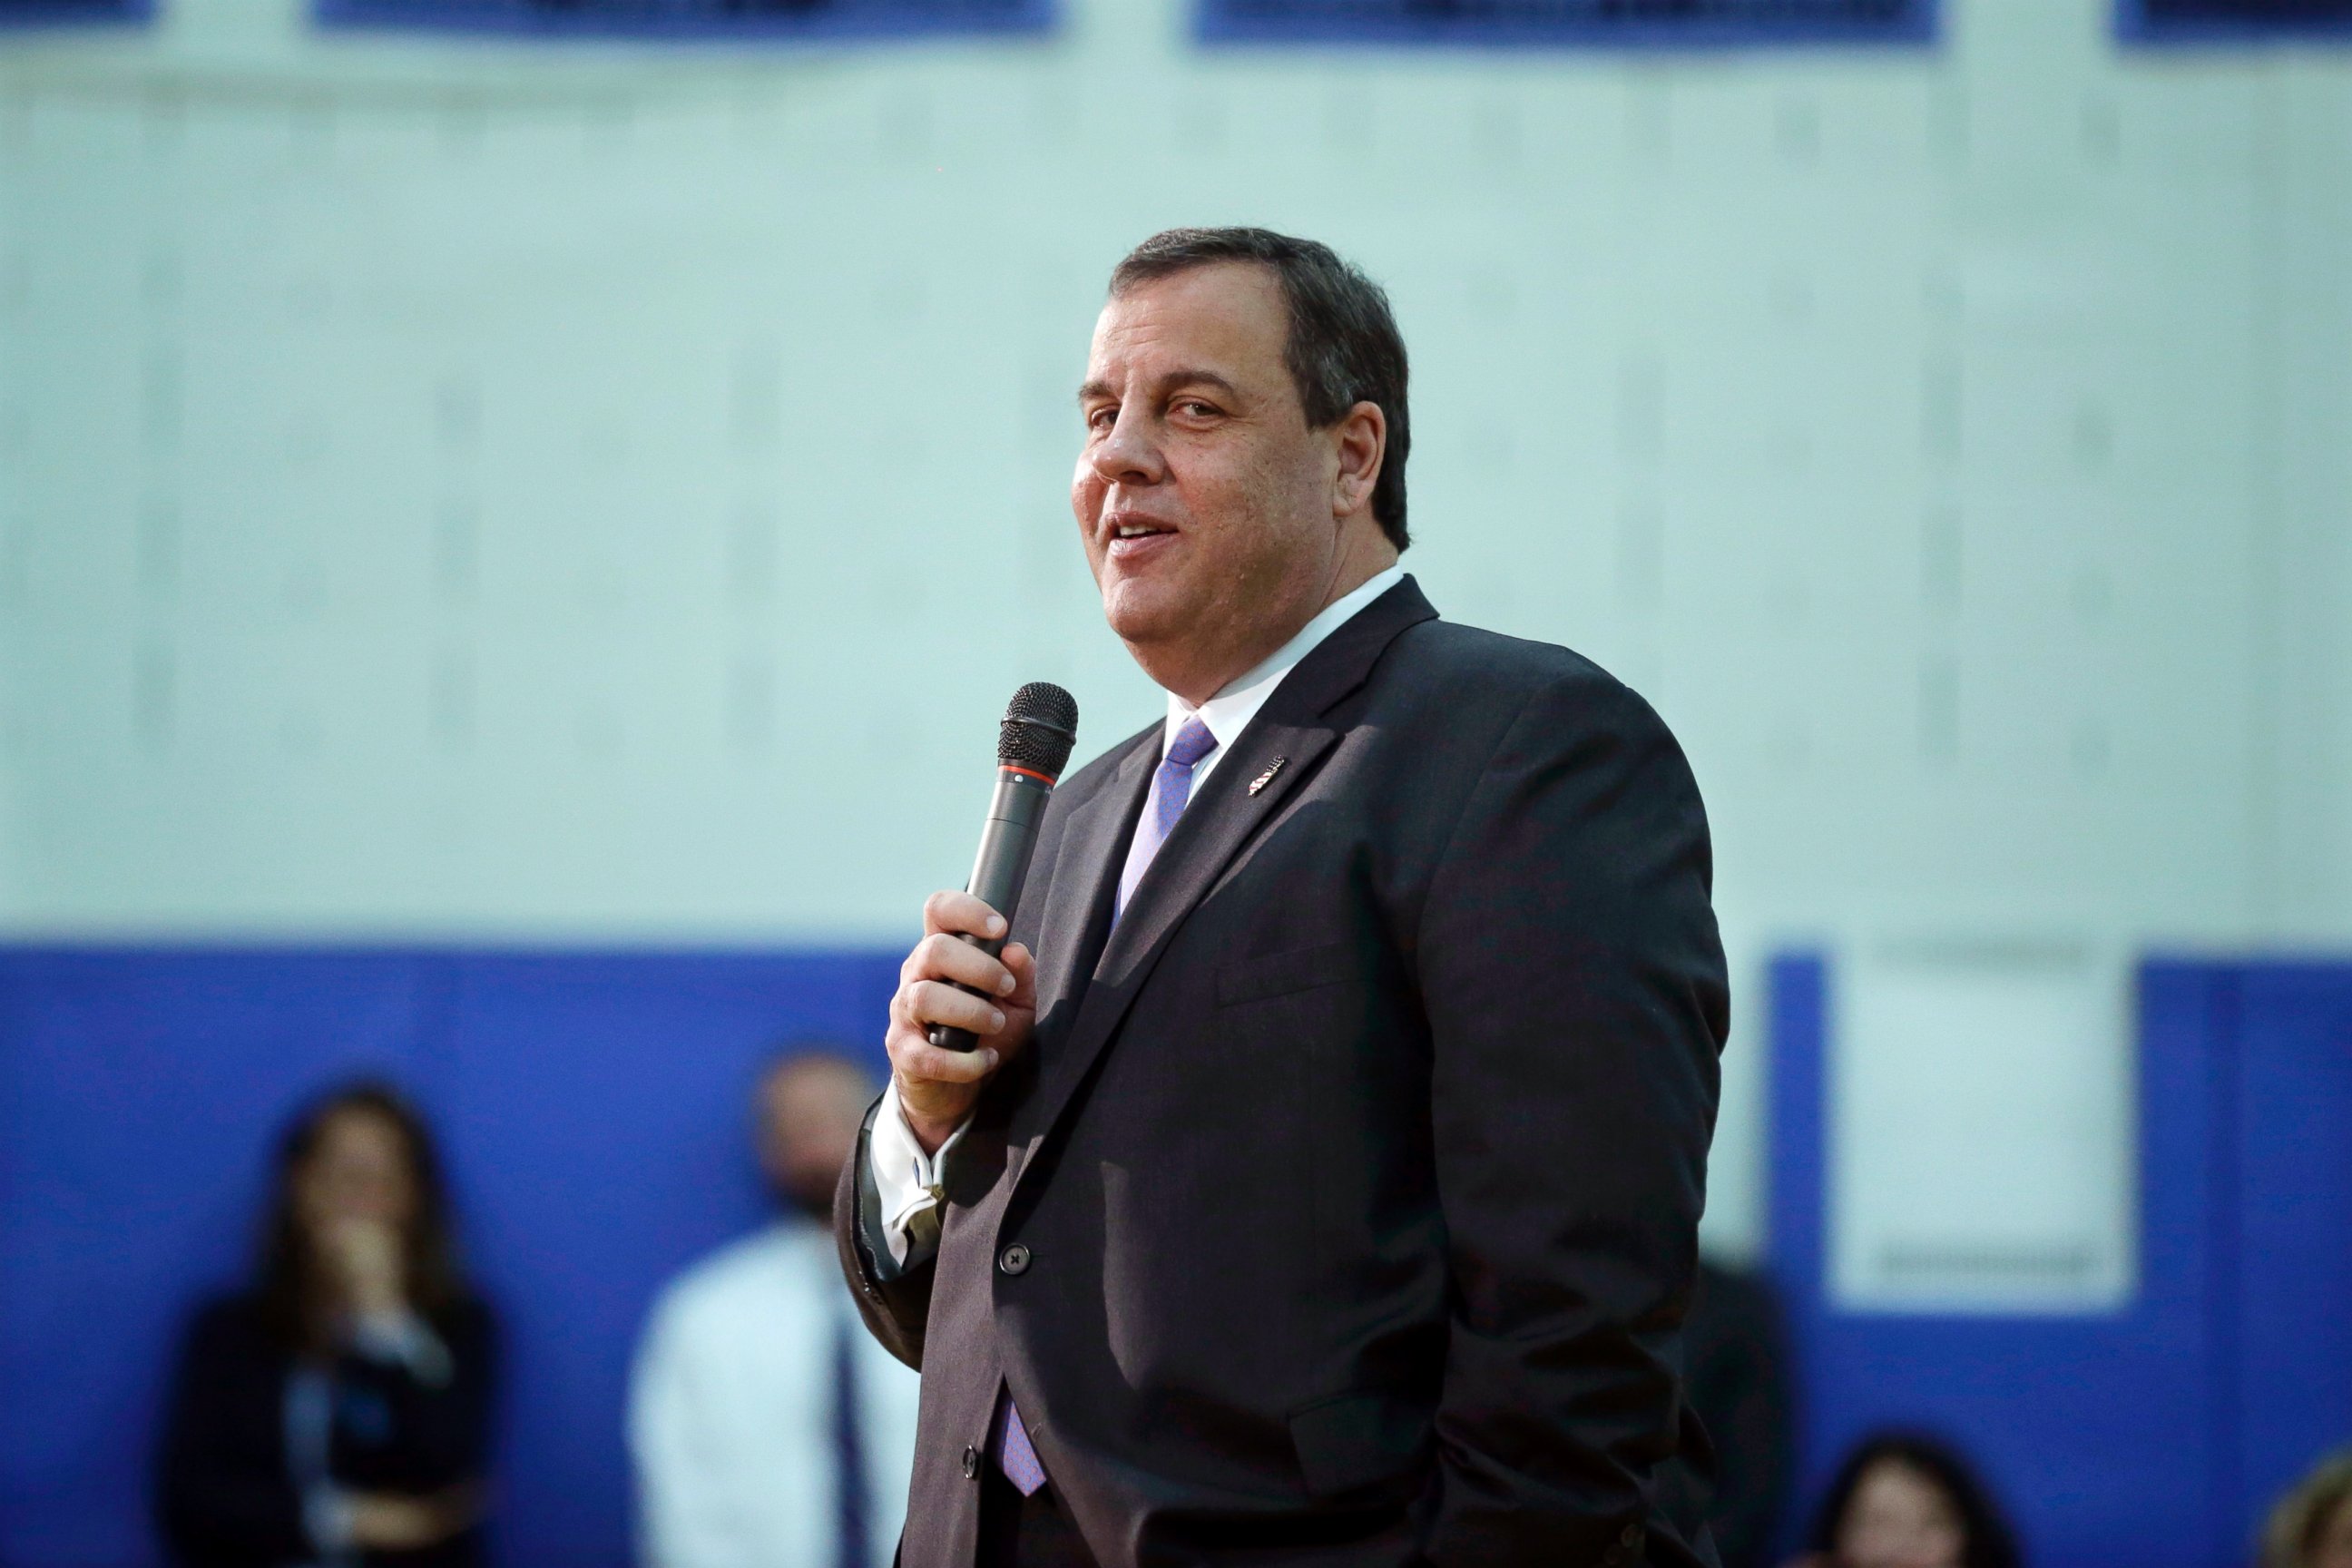 PHOTO: New Jersey Gov. Chris Christie pauses while addressing students, teachers and parents at Mendham Township Middle School in Mendham Township, N.J., Dec. 17, 2014.